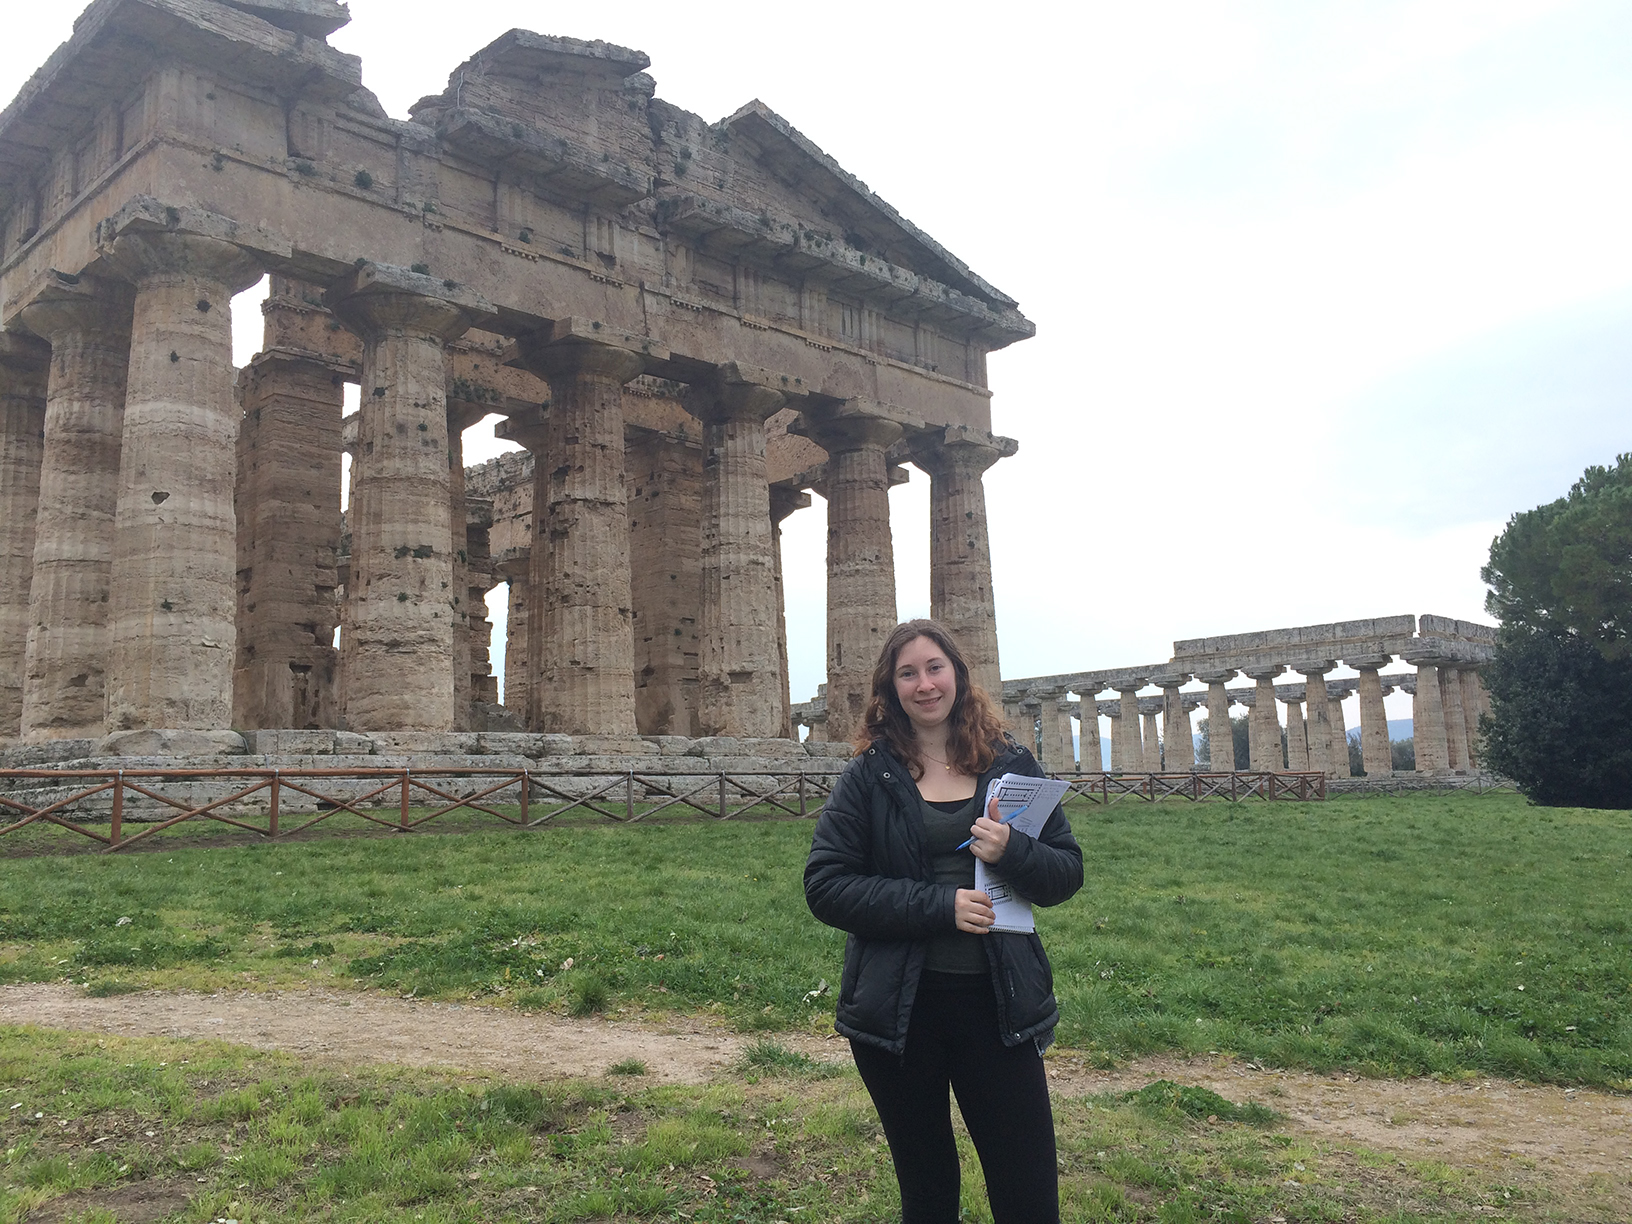  Rachel Beamish '16 poses in front of Greek temples while studying abroad in Rome.